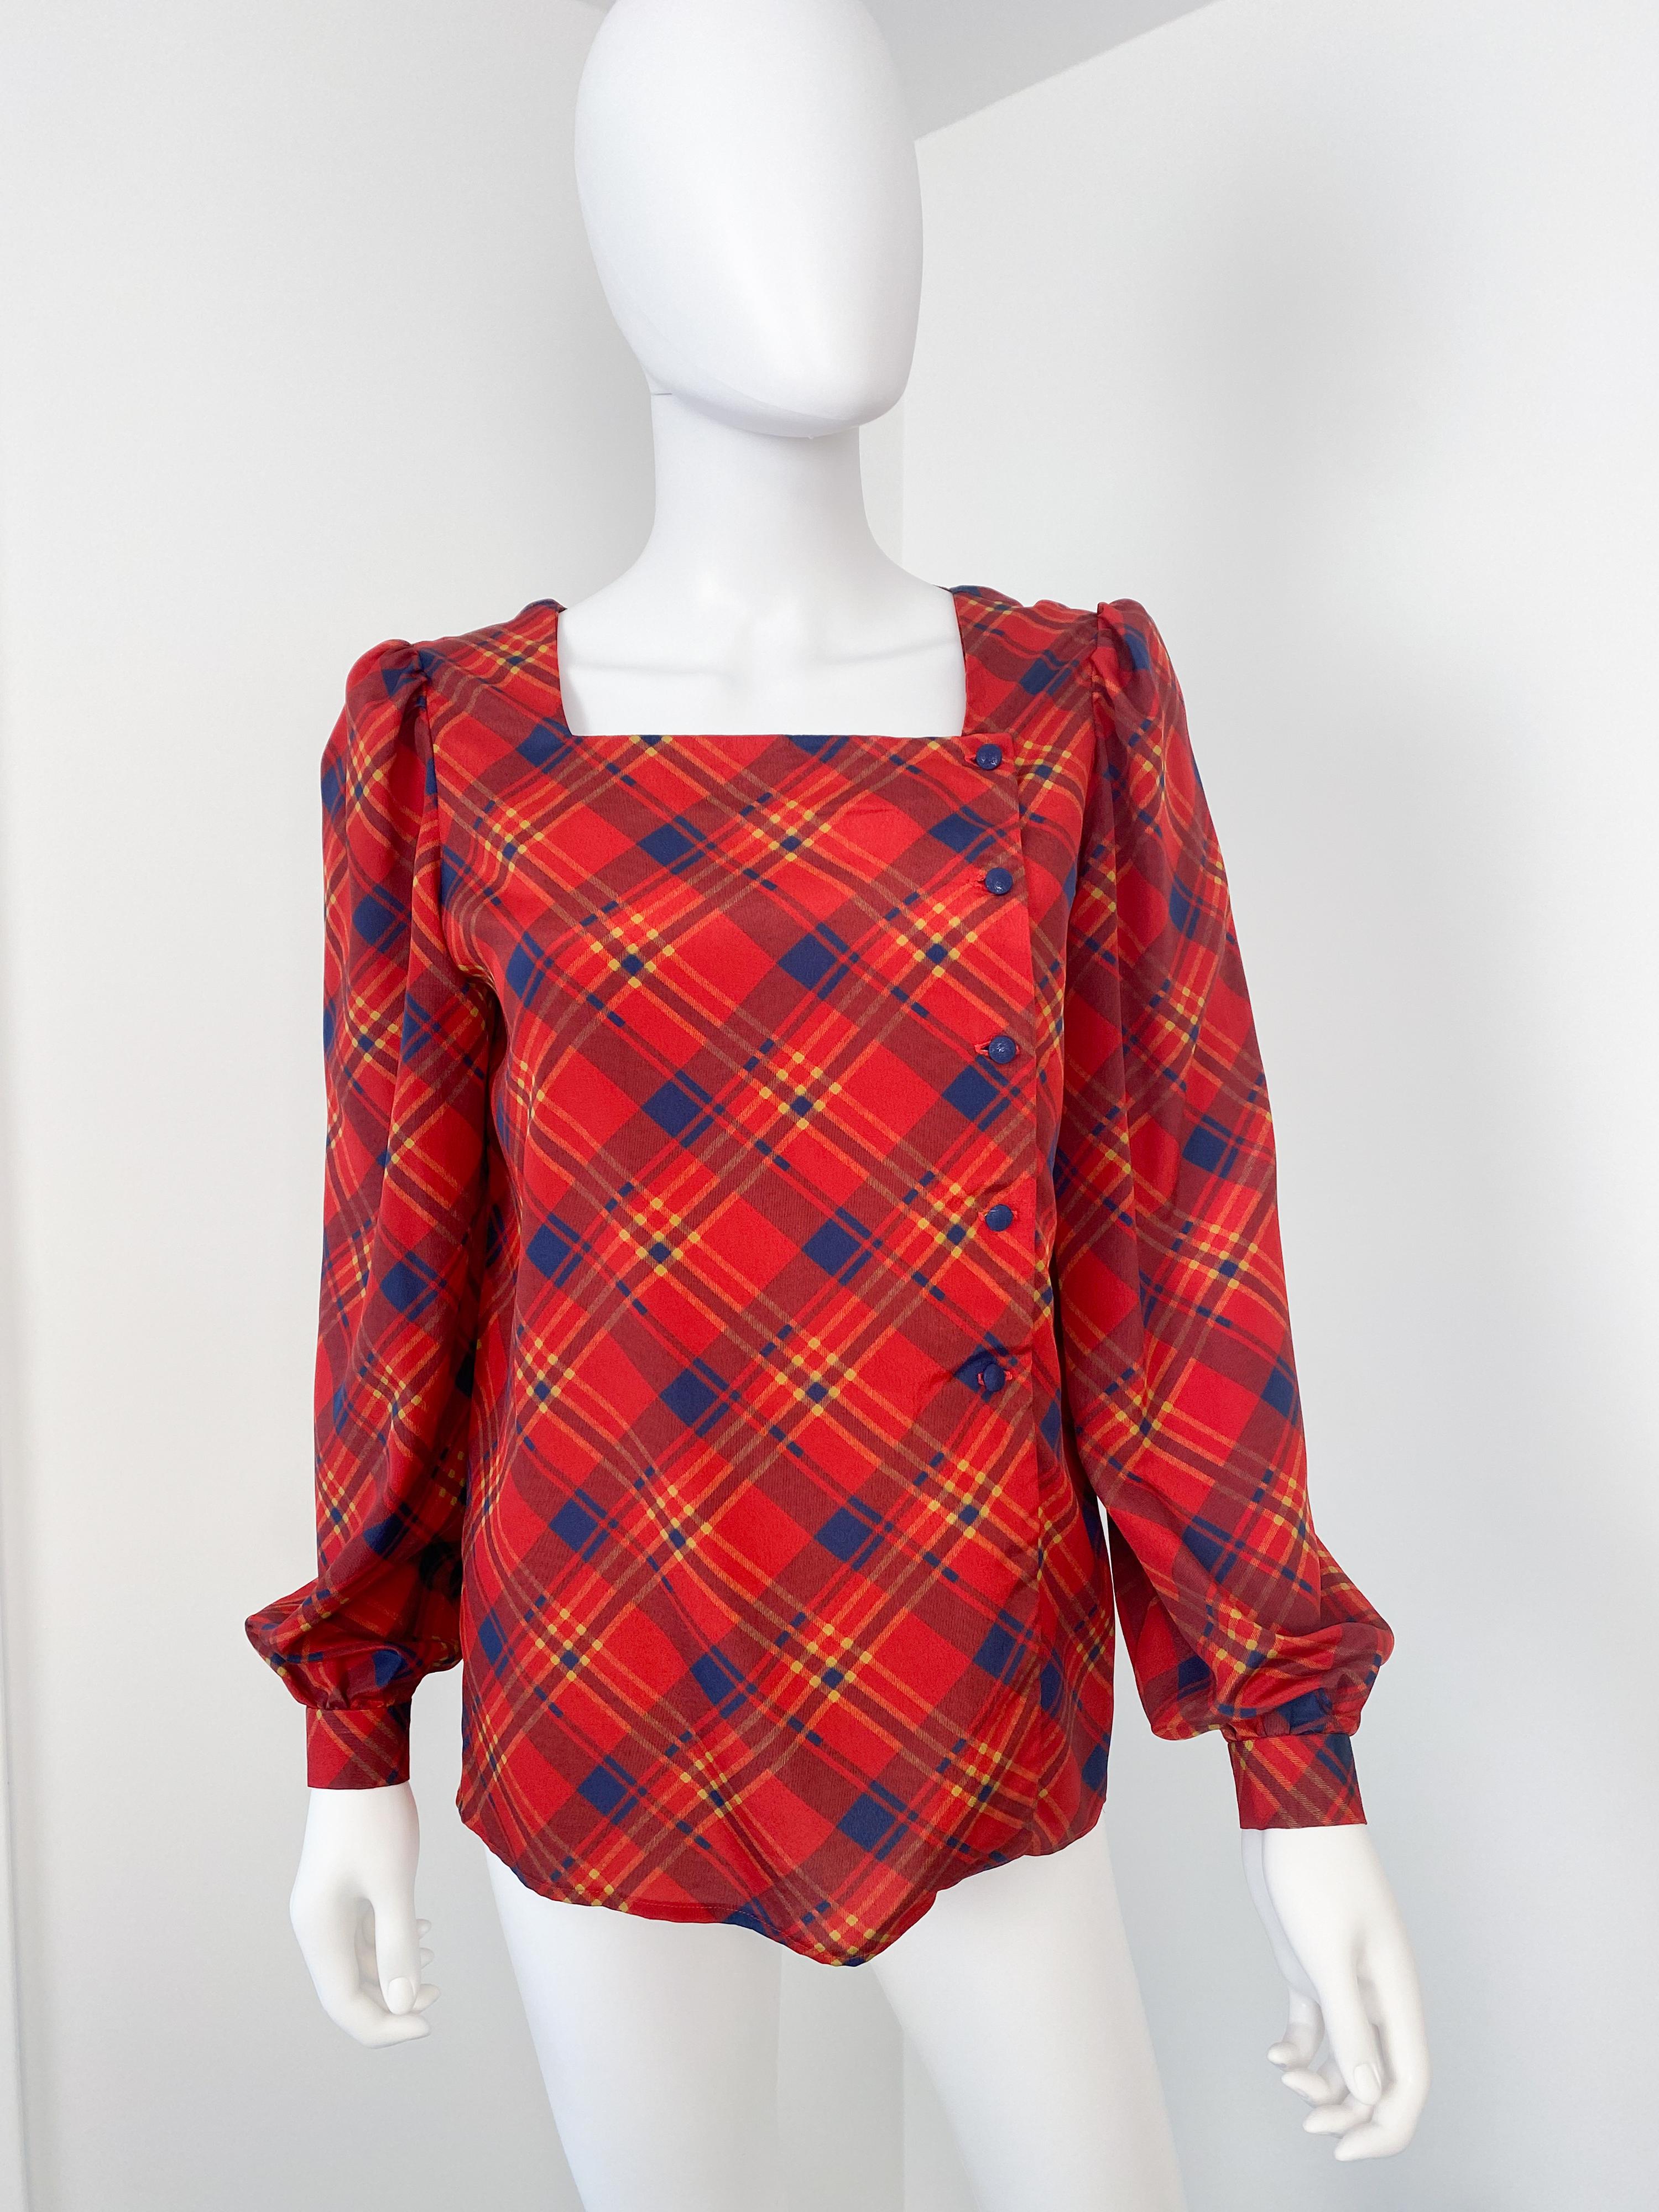 Women's Vintage 1980s Silky Polyester Blouse Top Red and Blue Tartan Size 6/8 For Sale